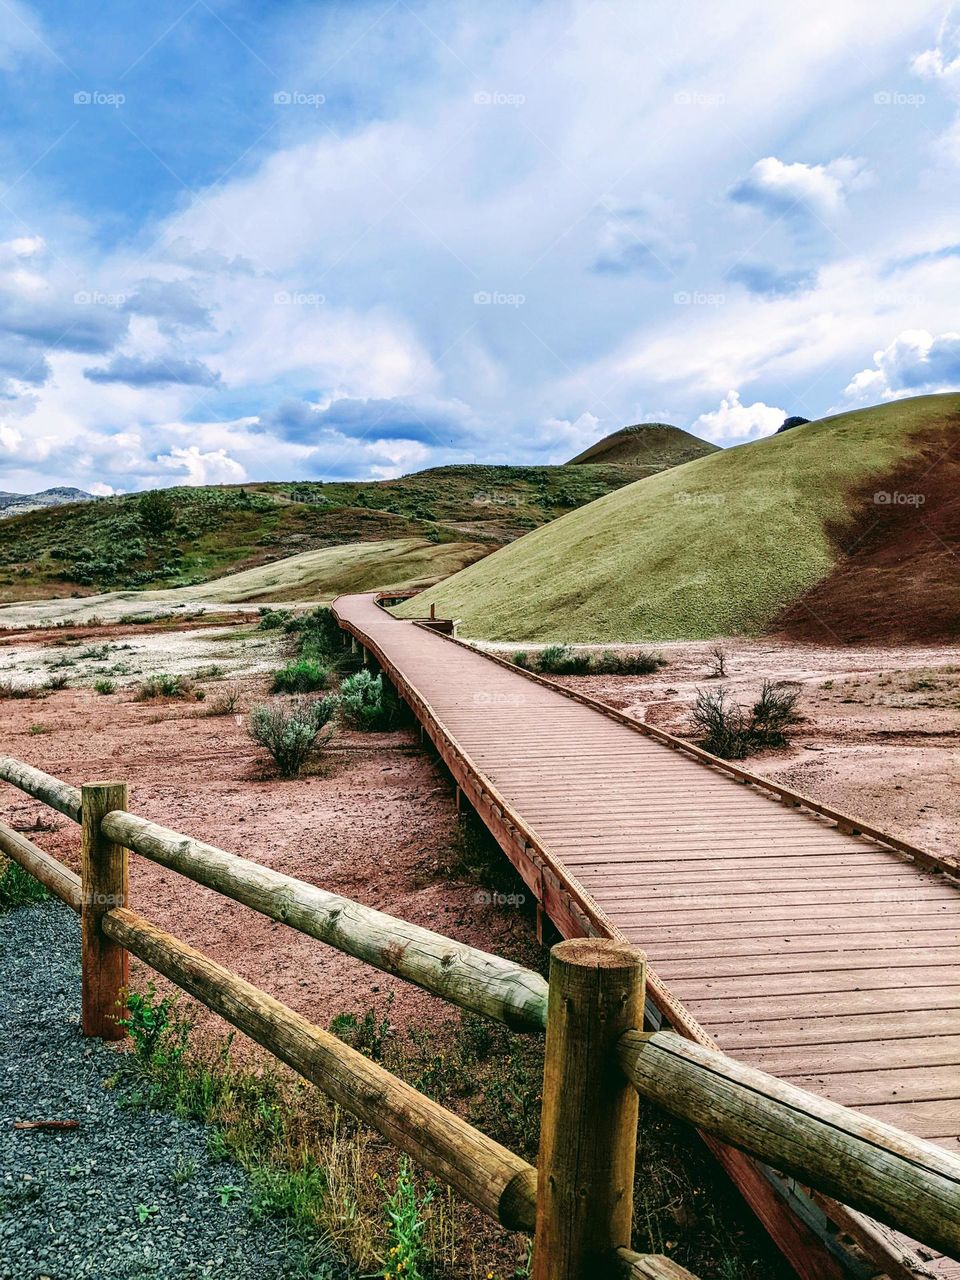 hardwood boardwalk to protect the underground at John day fossils bed national park